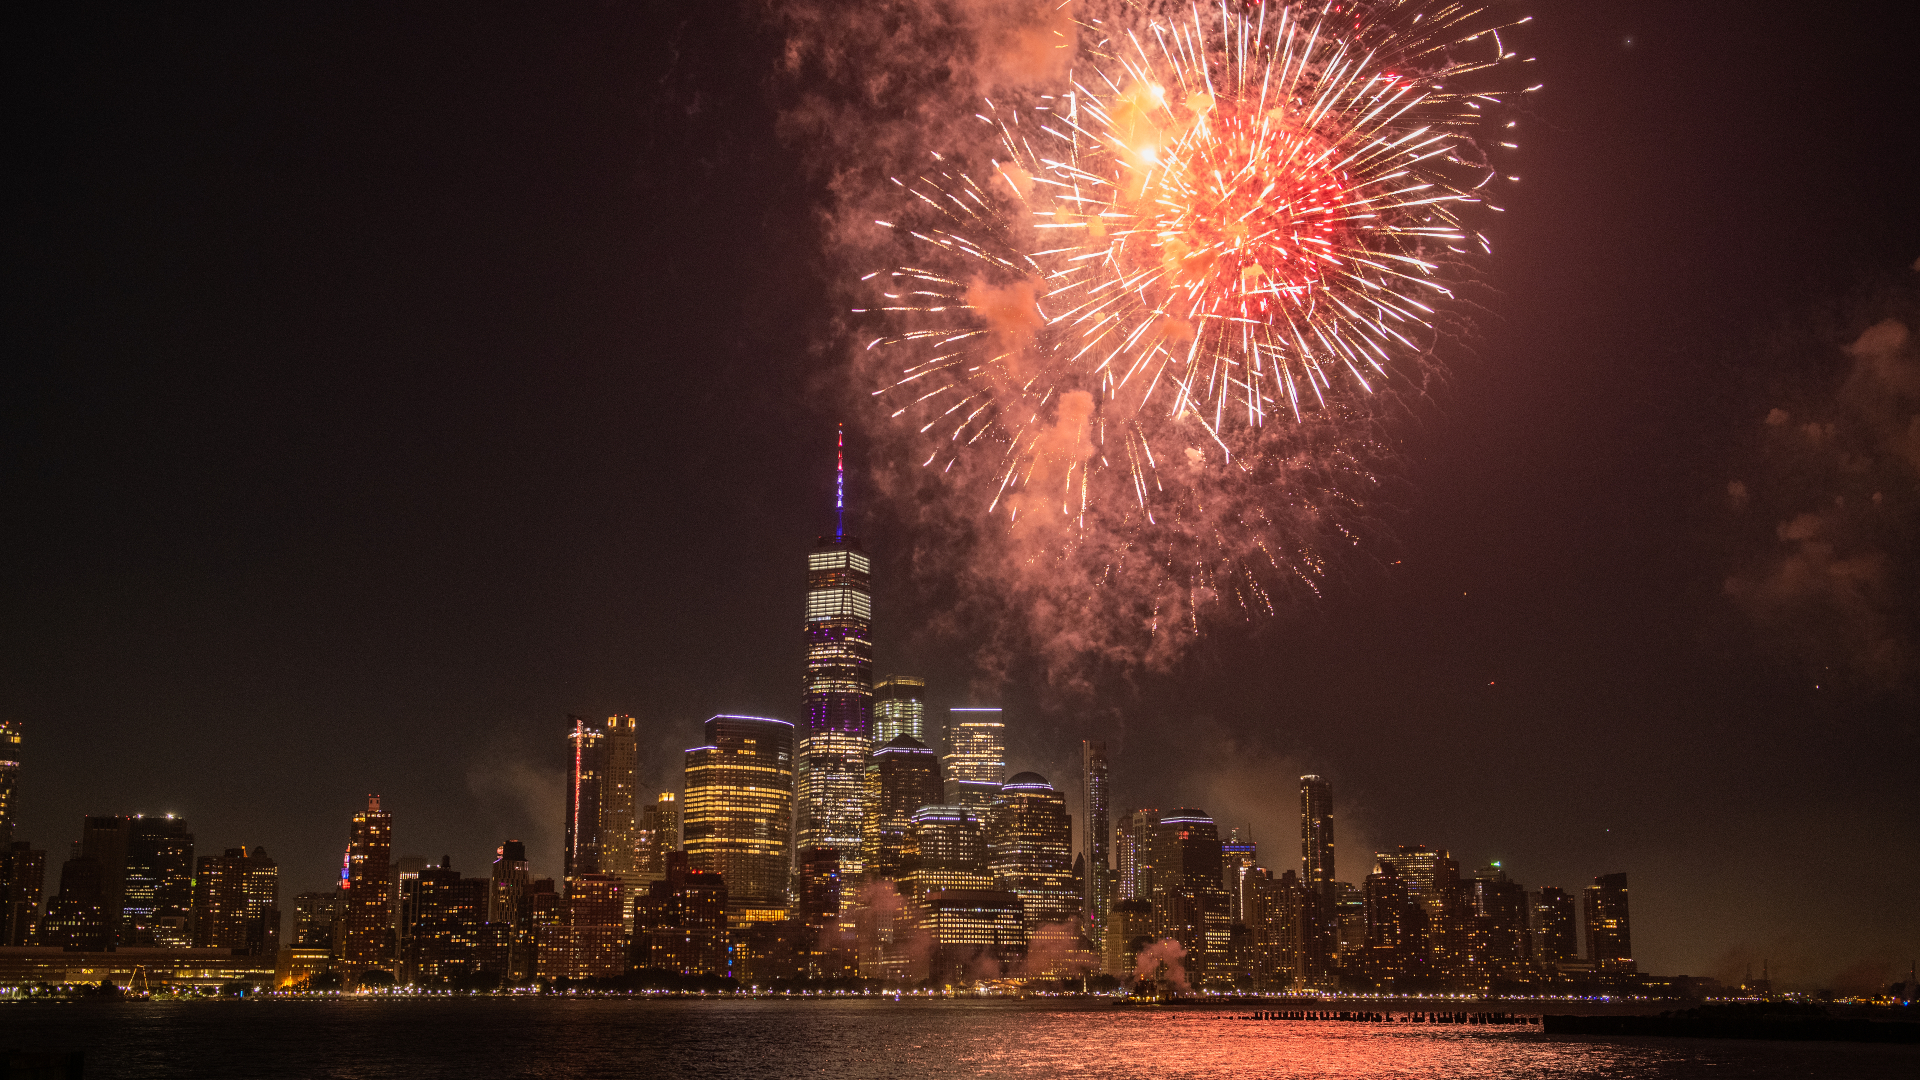 A view of fireworks during the 43rd annual Macy's Fourth of July Fireworks on July 4, 2019 in New York City.